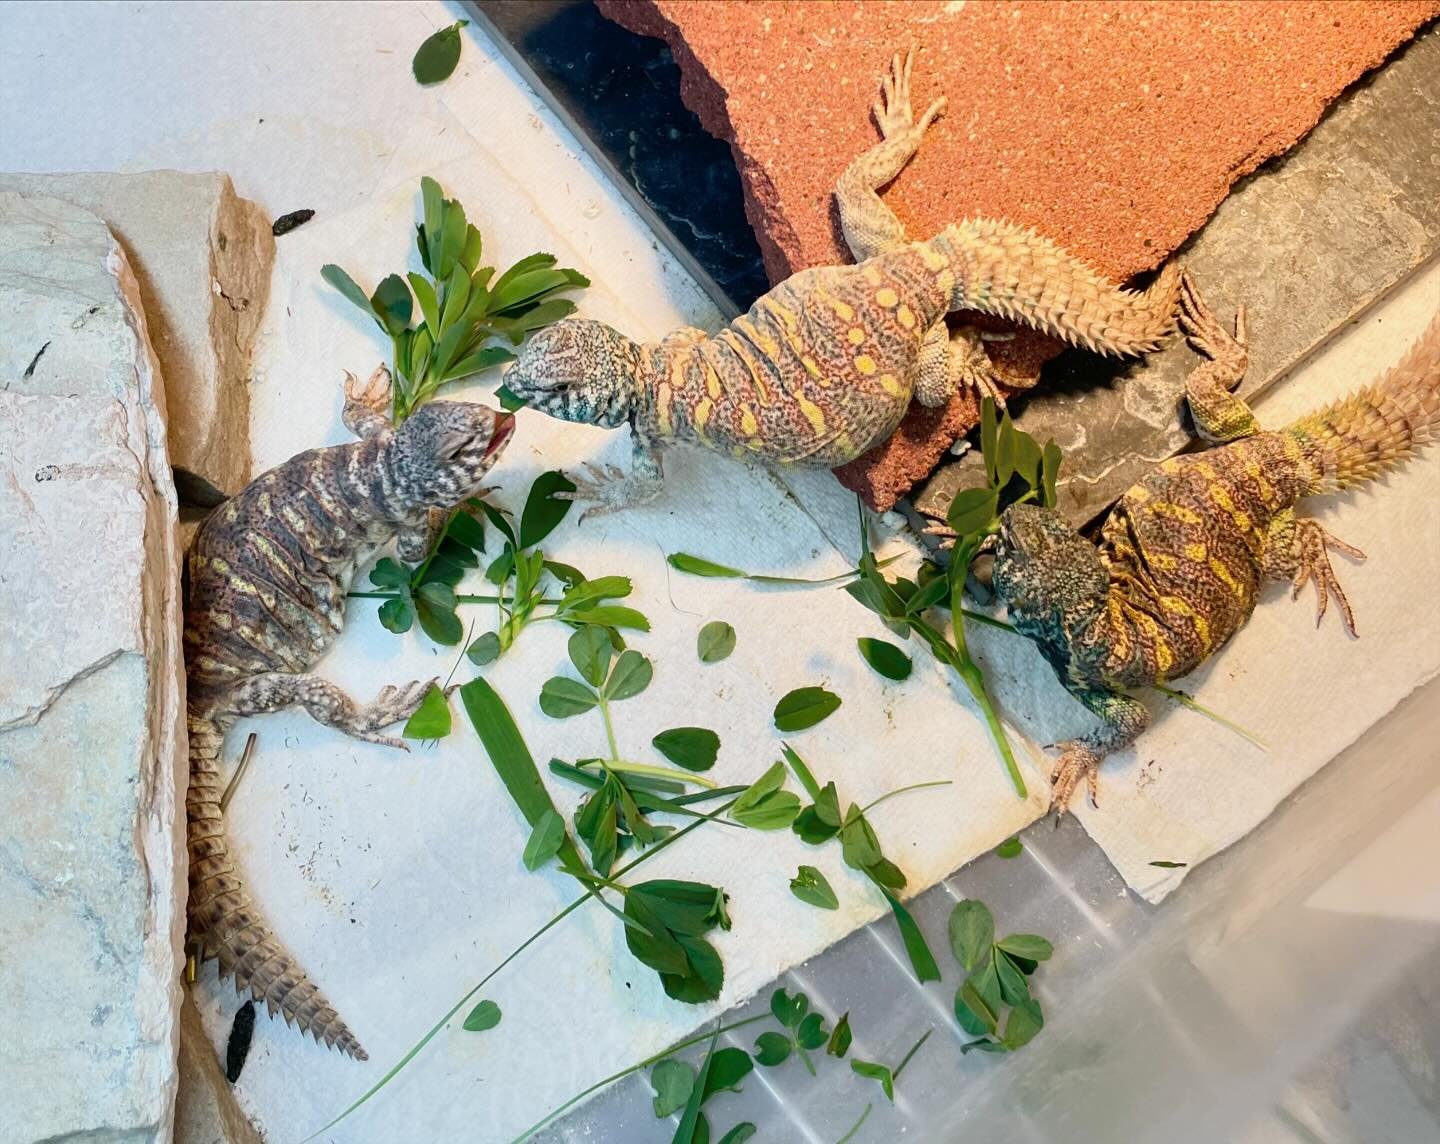 It&rsquo;s the tiiiiiiiime of the season&hellip;.😂 The best time of year is when my animals can get wild foods. #aridsonly #lizards #lizardsofinstagram #reptiles #reptilesofinstagram #xenagama #xenagamataylori #xenagamaofinstagram #uromastyx #uromas